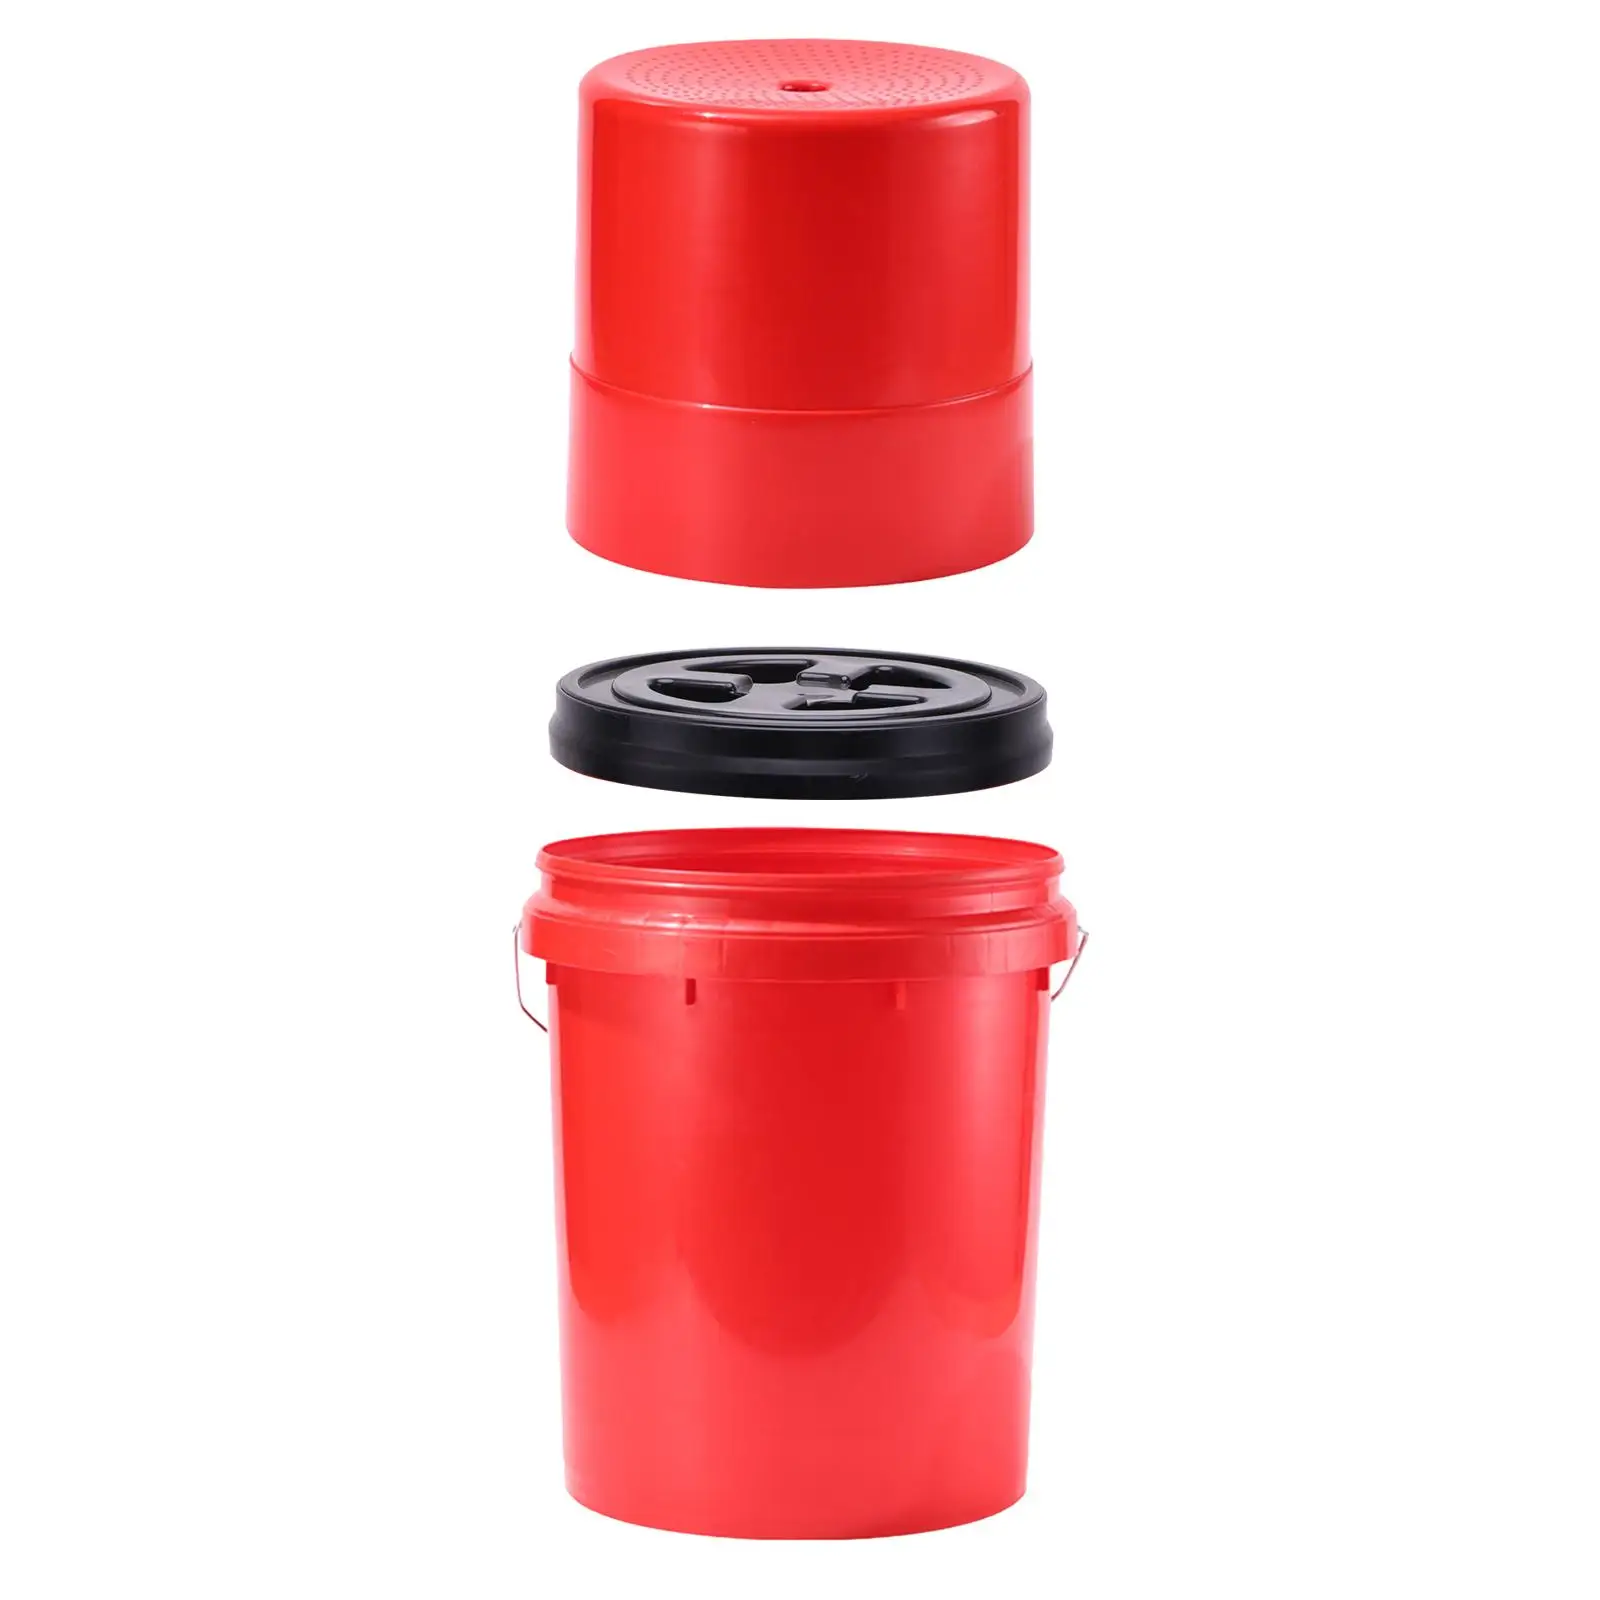 Automotive Washing Accessories Bucket Chair for Car Washing Detailing